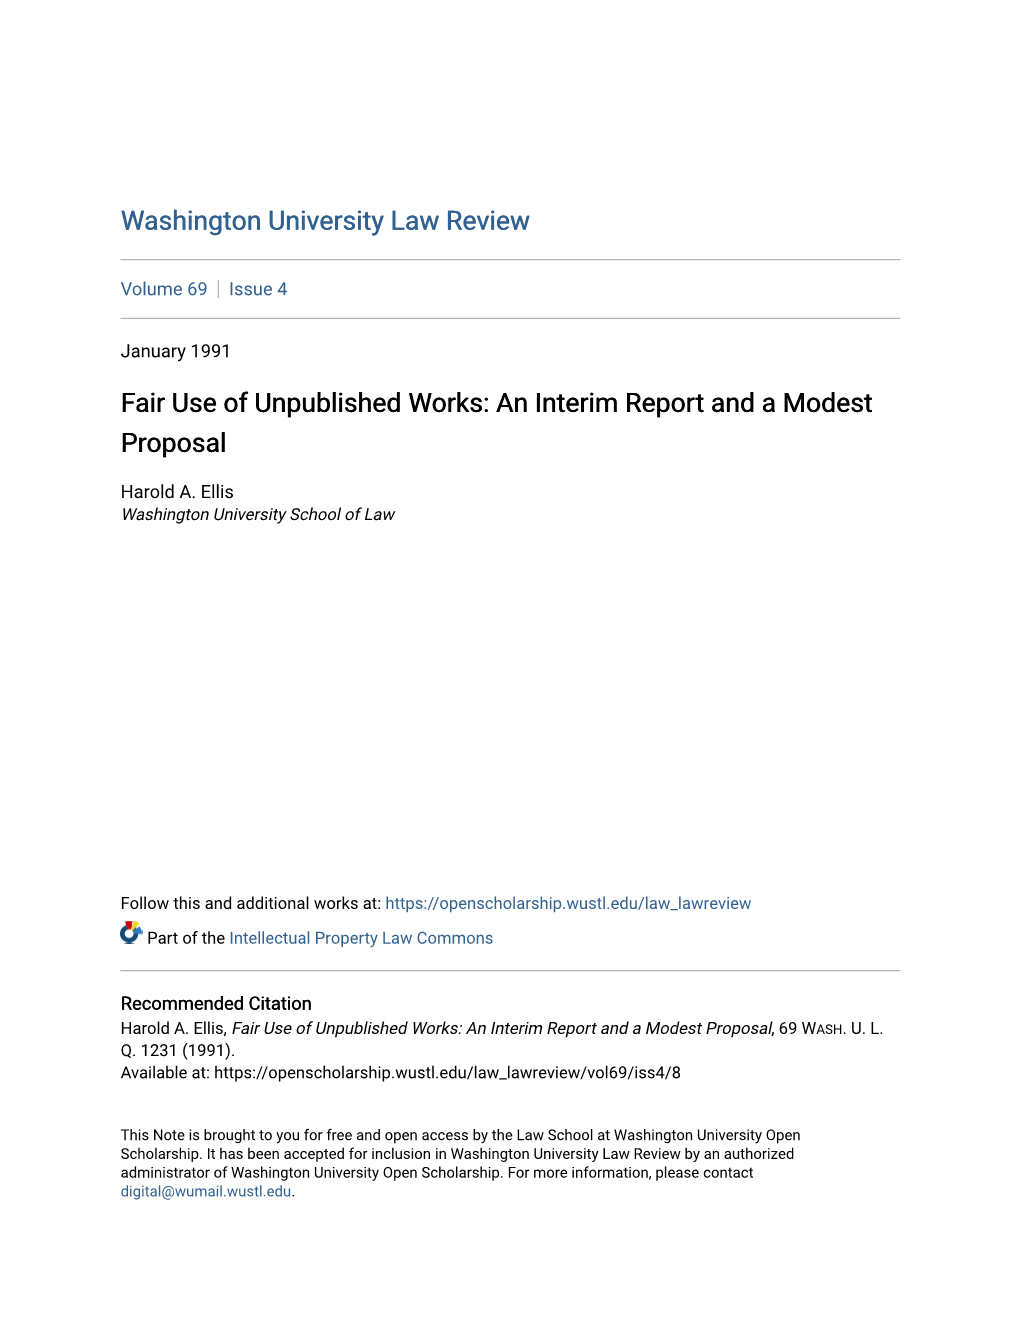 Fair Use of Unpublished Works: an Interim Report and a Modest Proposal